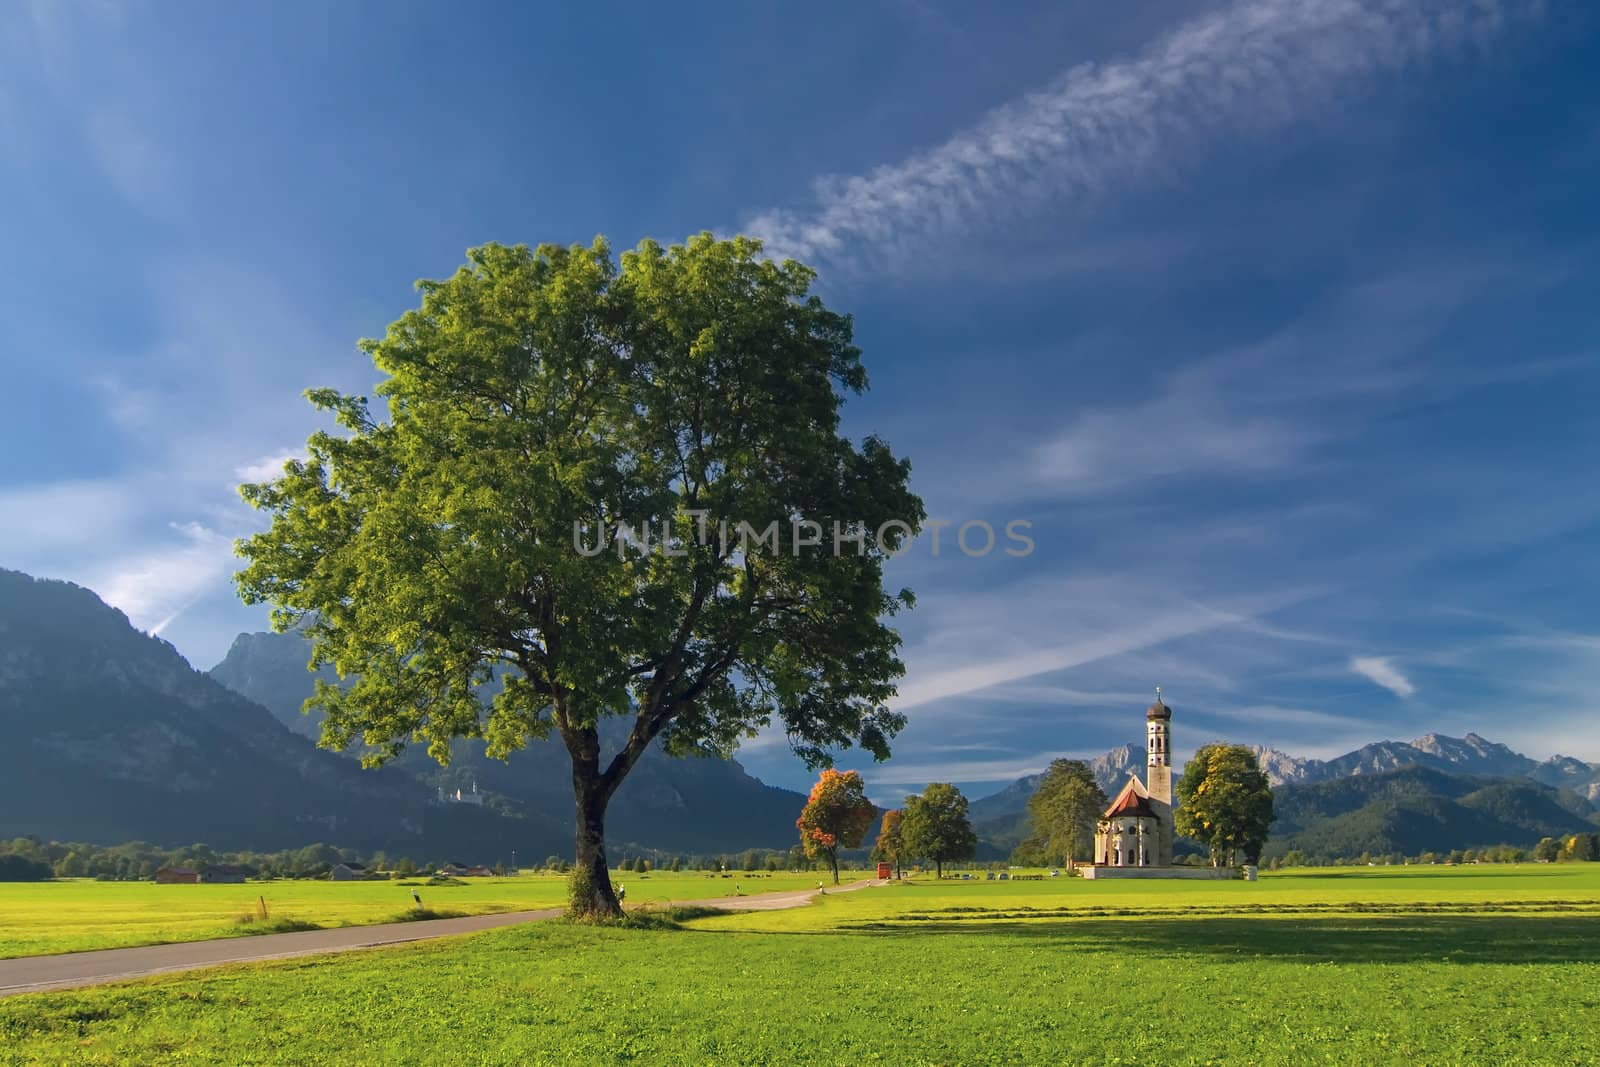 Autumn landscape with road, tree, church, mountains and sky on backgruond